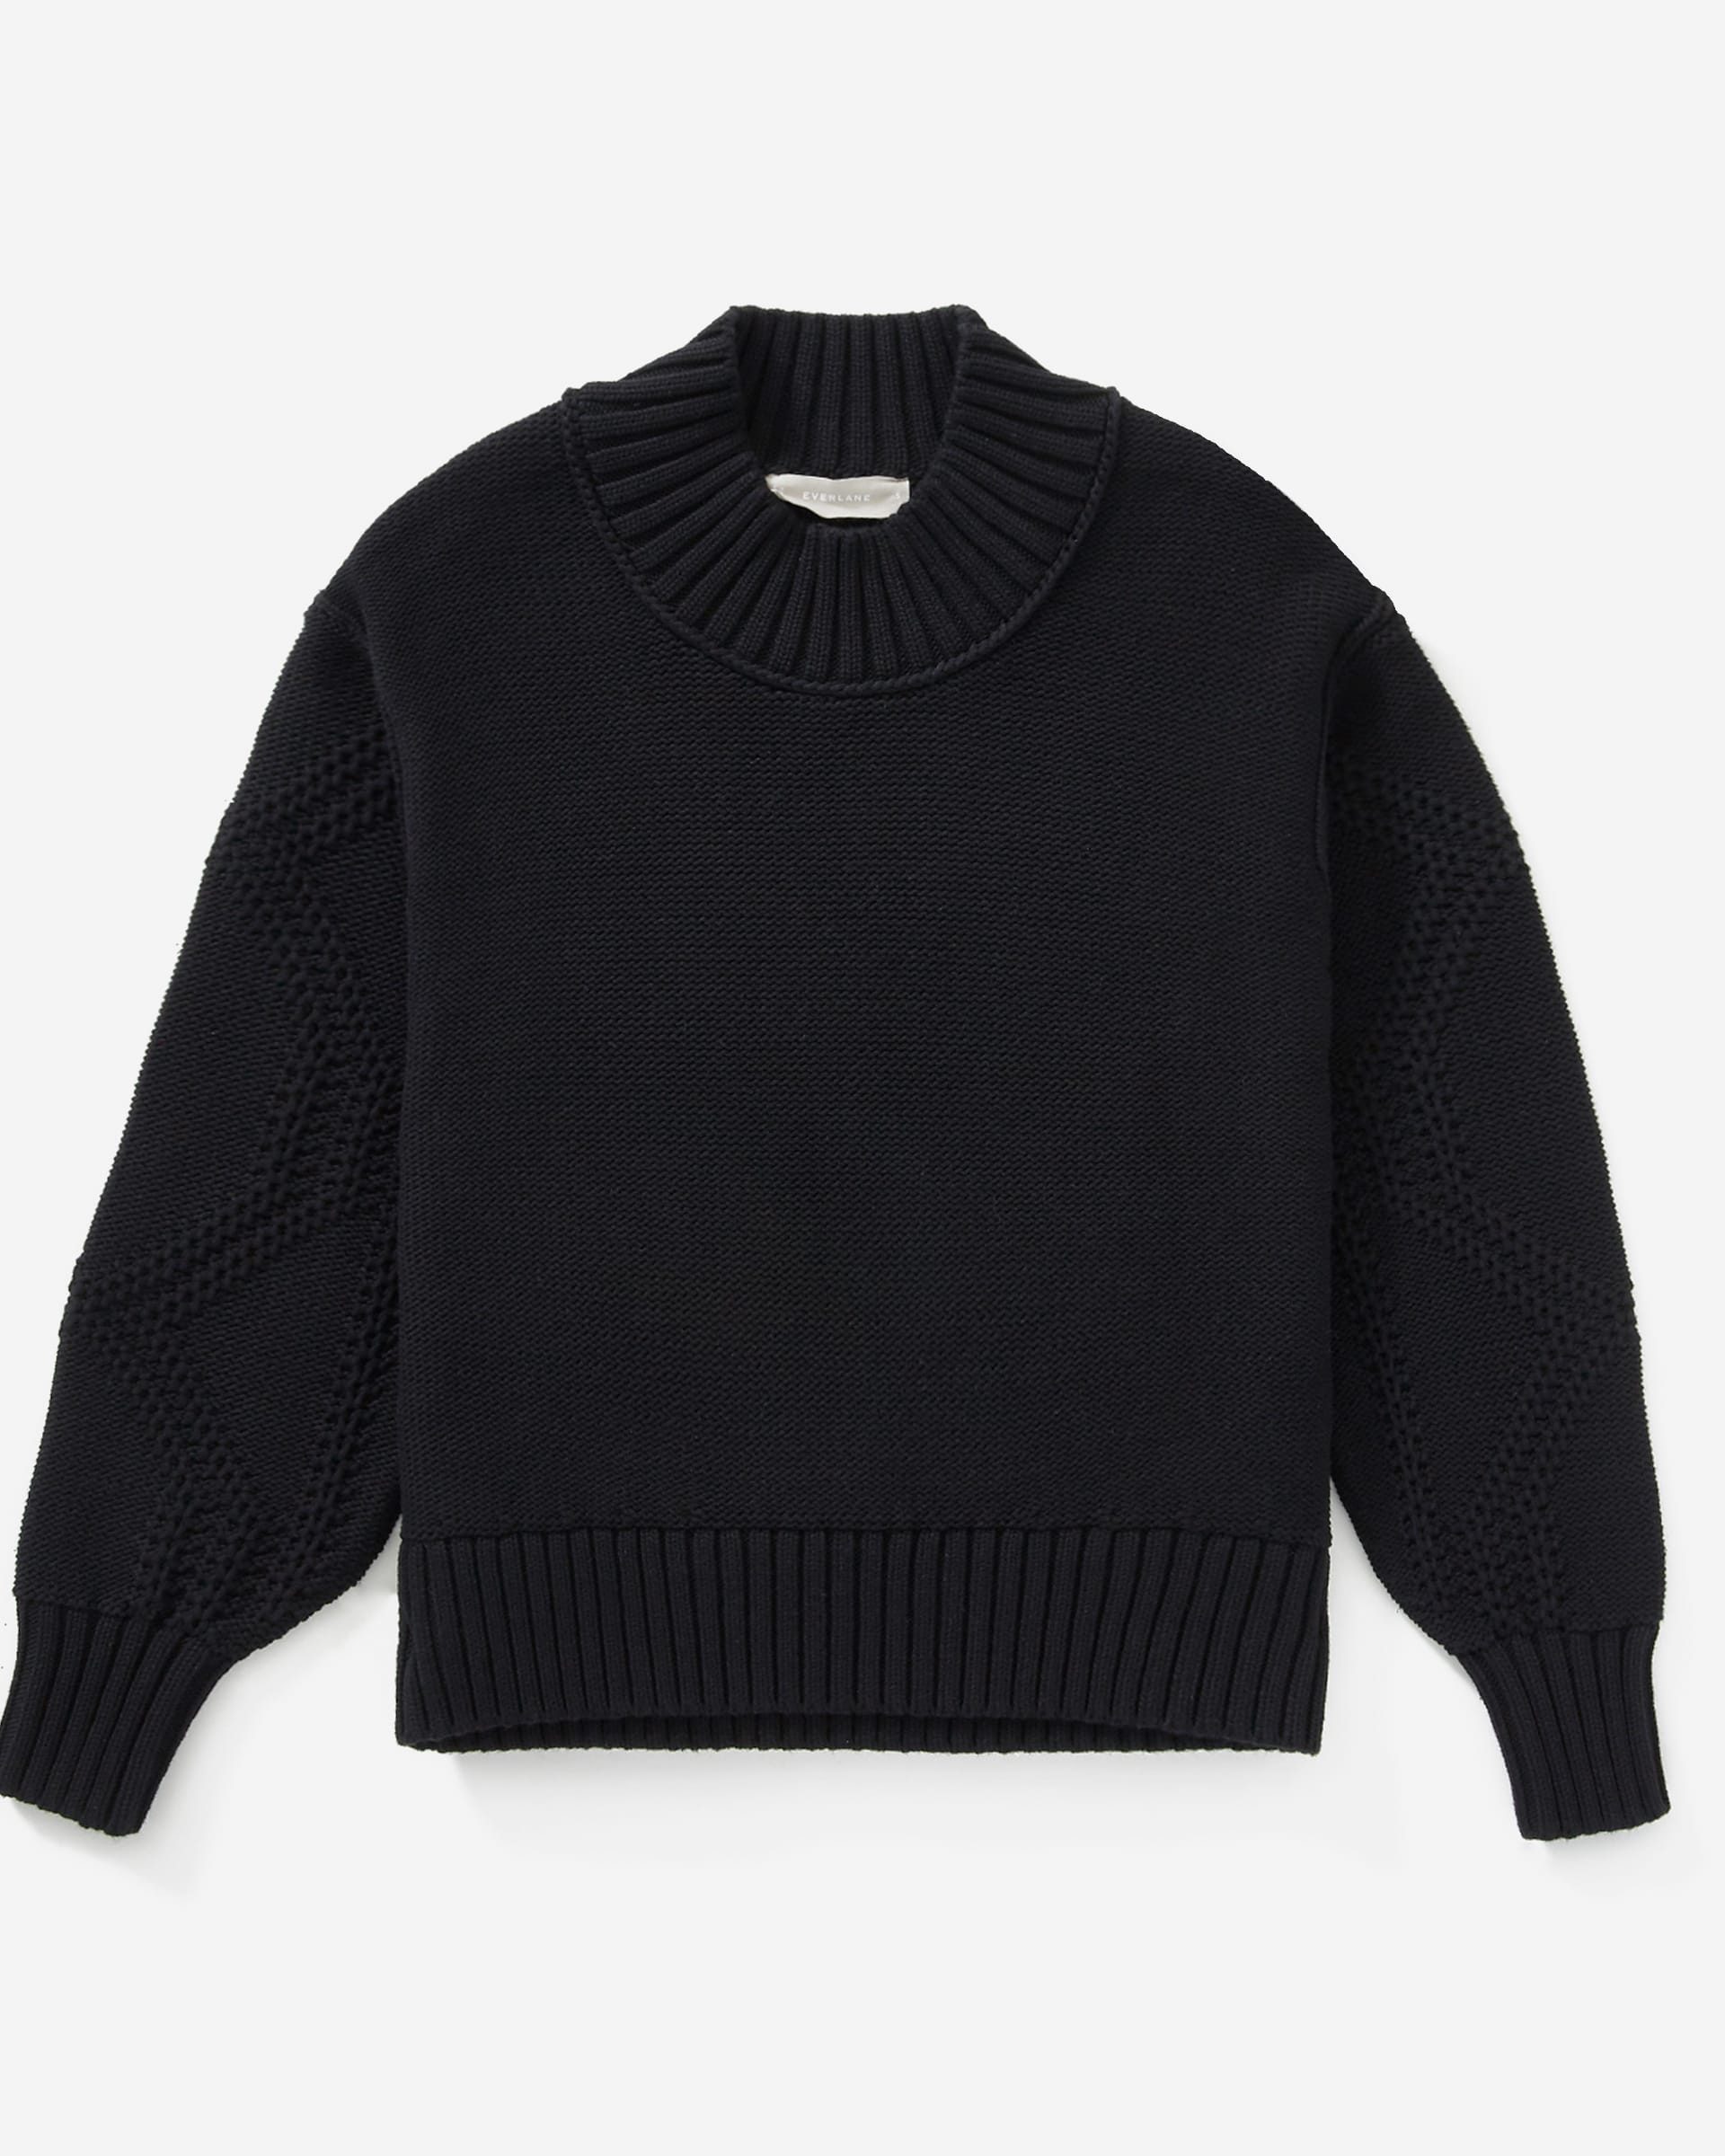 The Texture Cotton Cable Sweater Black – Everlane